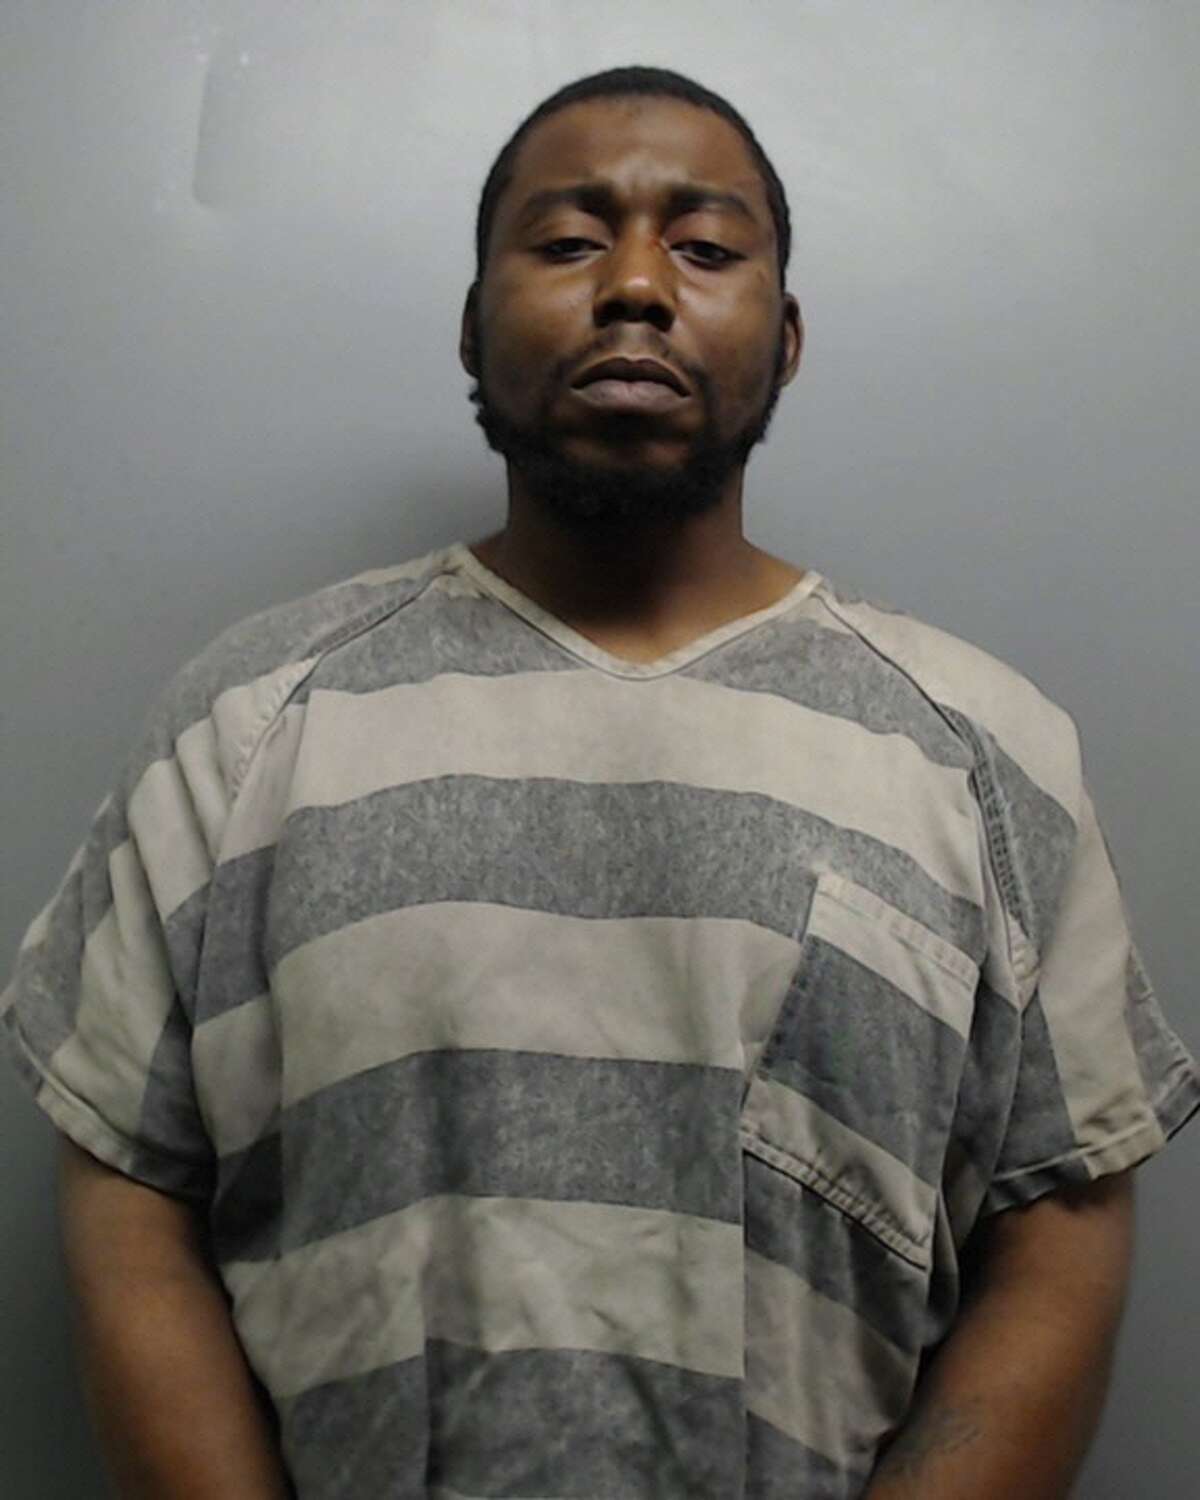 Melvin Darlington, 37, was arrested and charged with aggravated assault with deadly weapon.